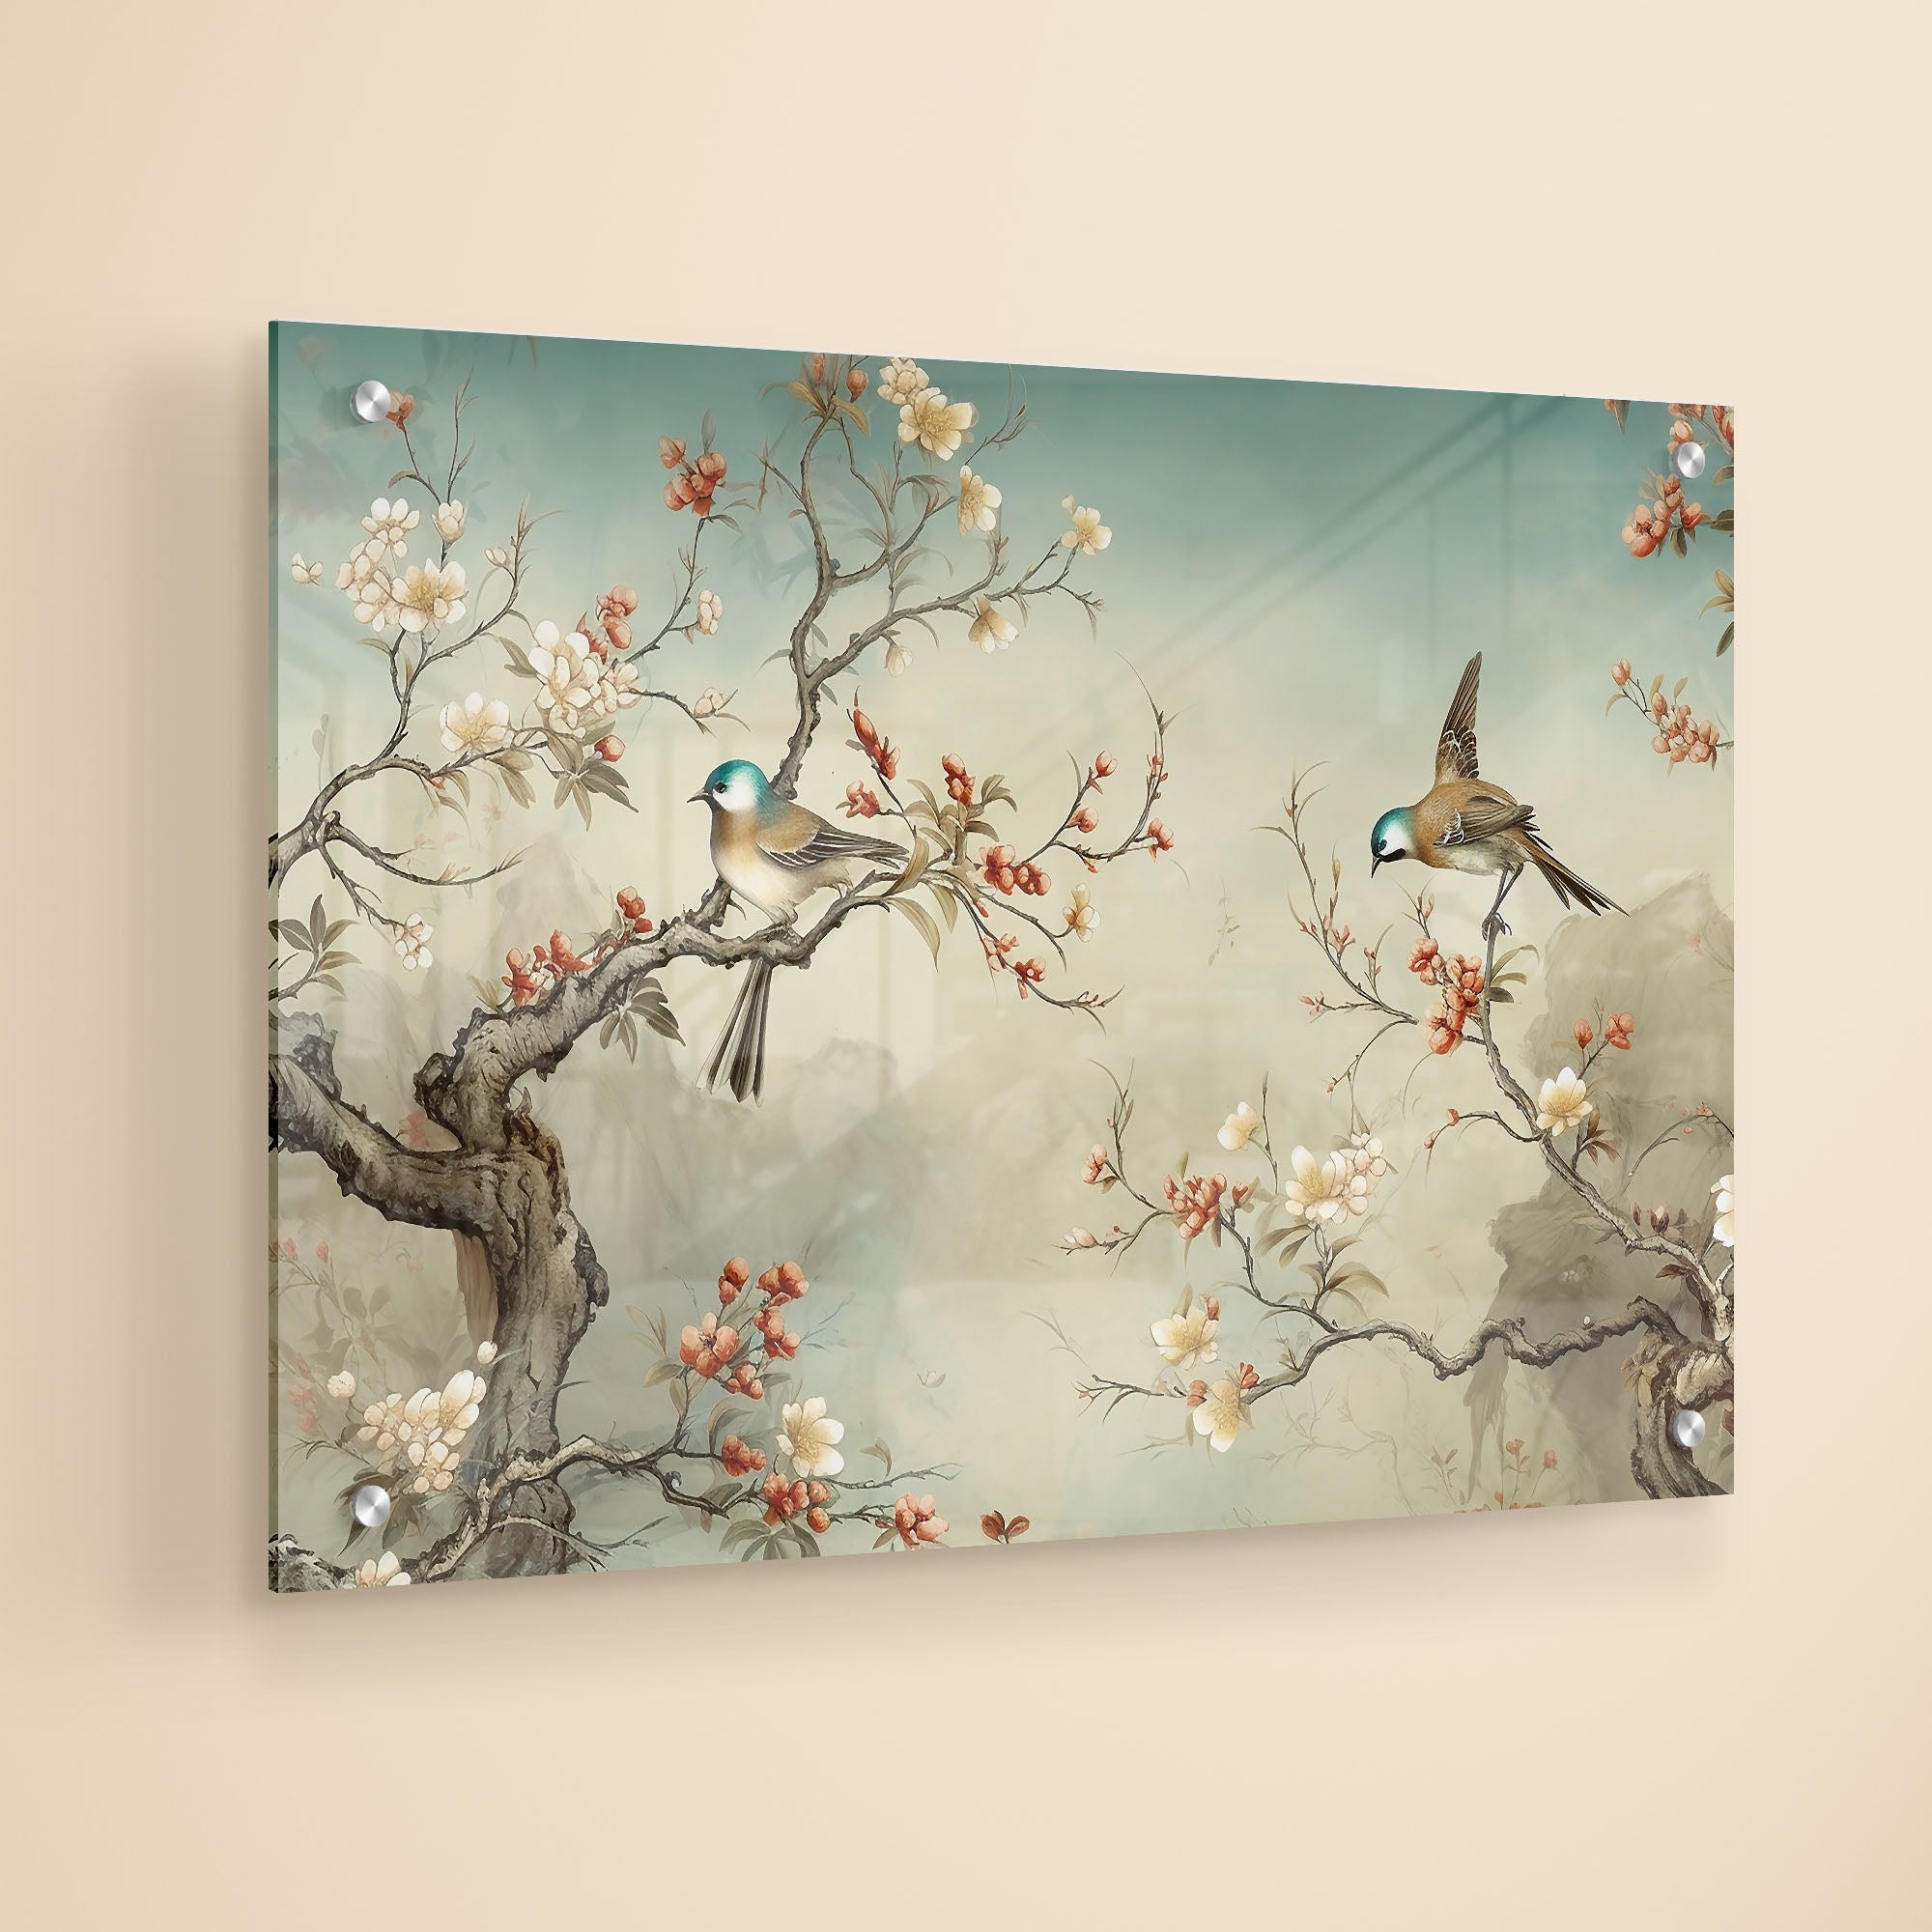 Abstract Birds and Flower Tree Acrylic Wall Painting